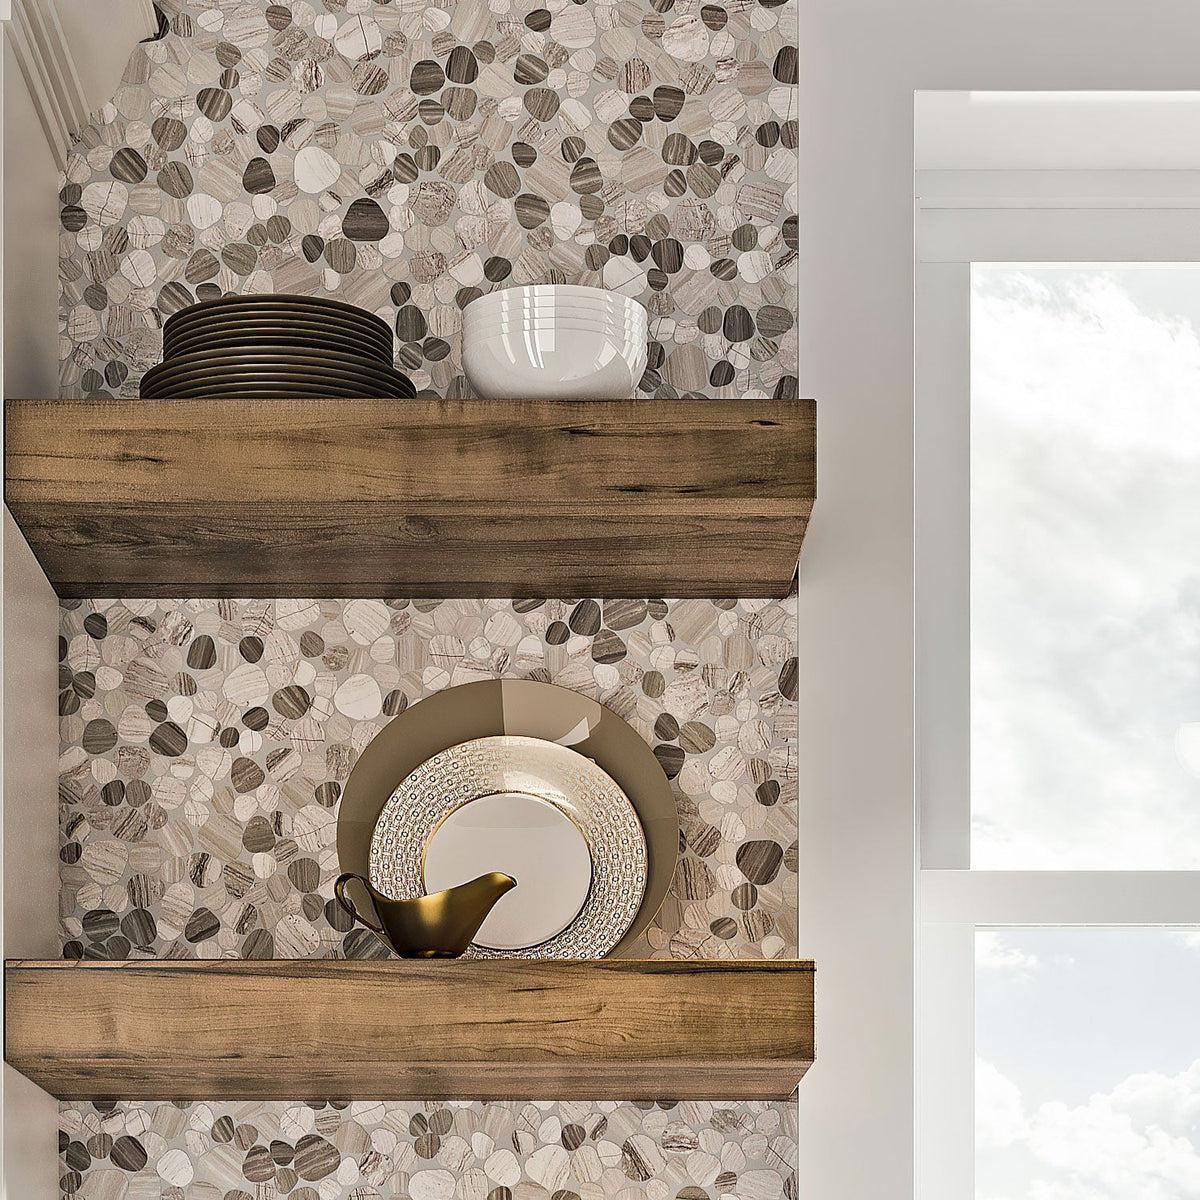 Pebble Wooden Beige Marble Mosaic Tile Kitchen Wall with Shelves